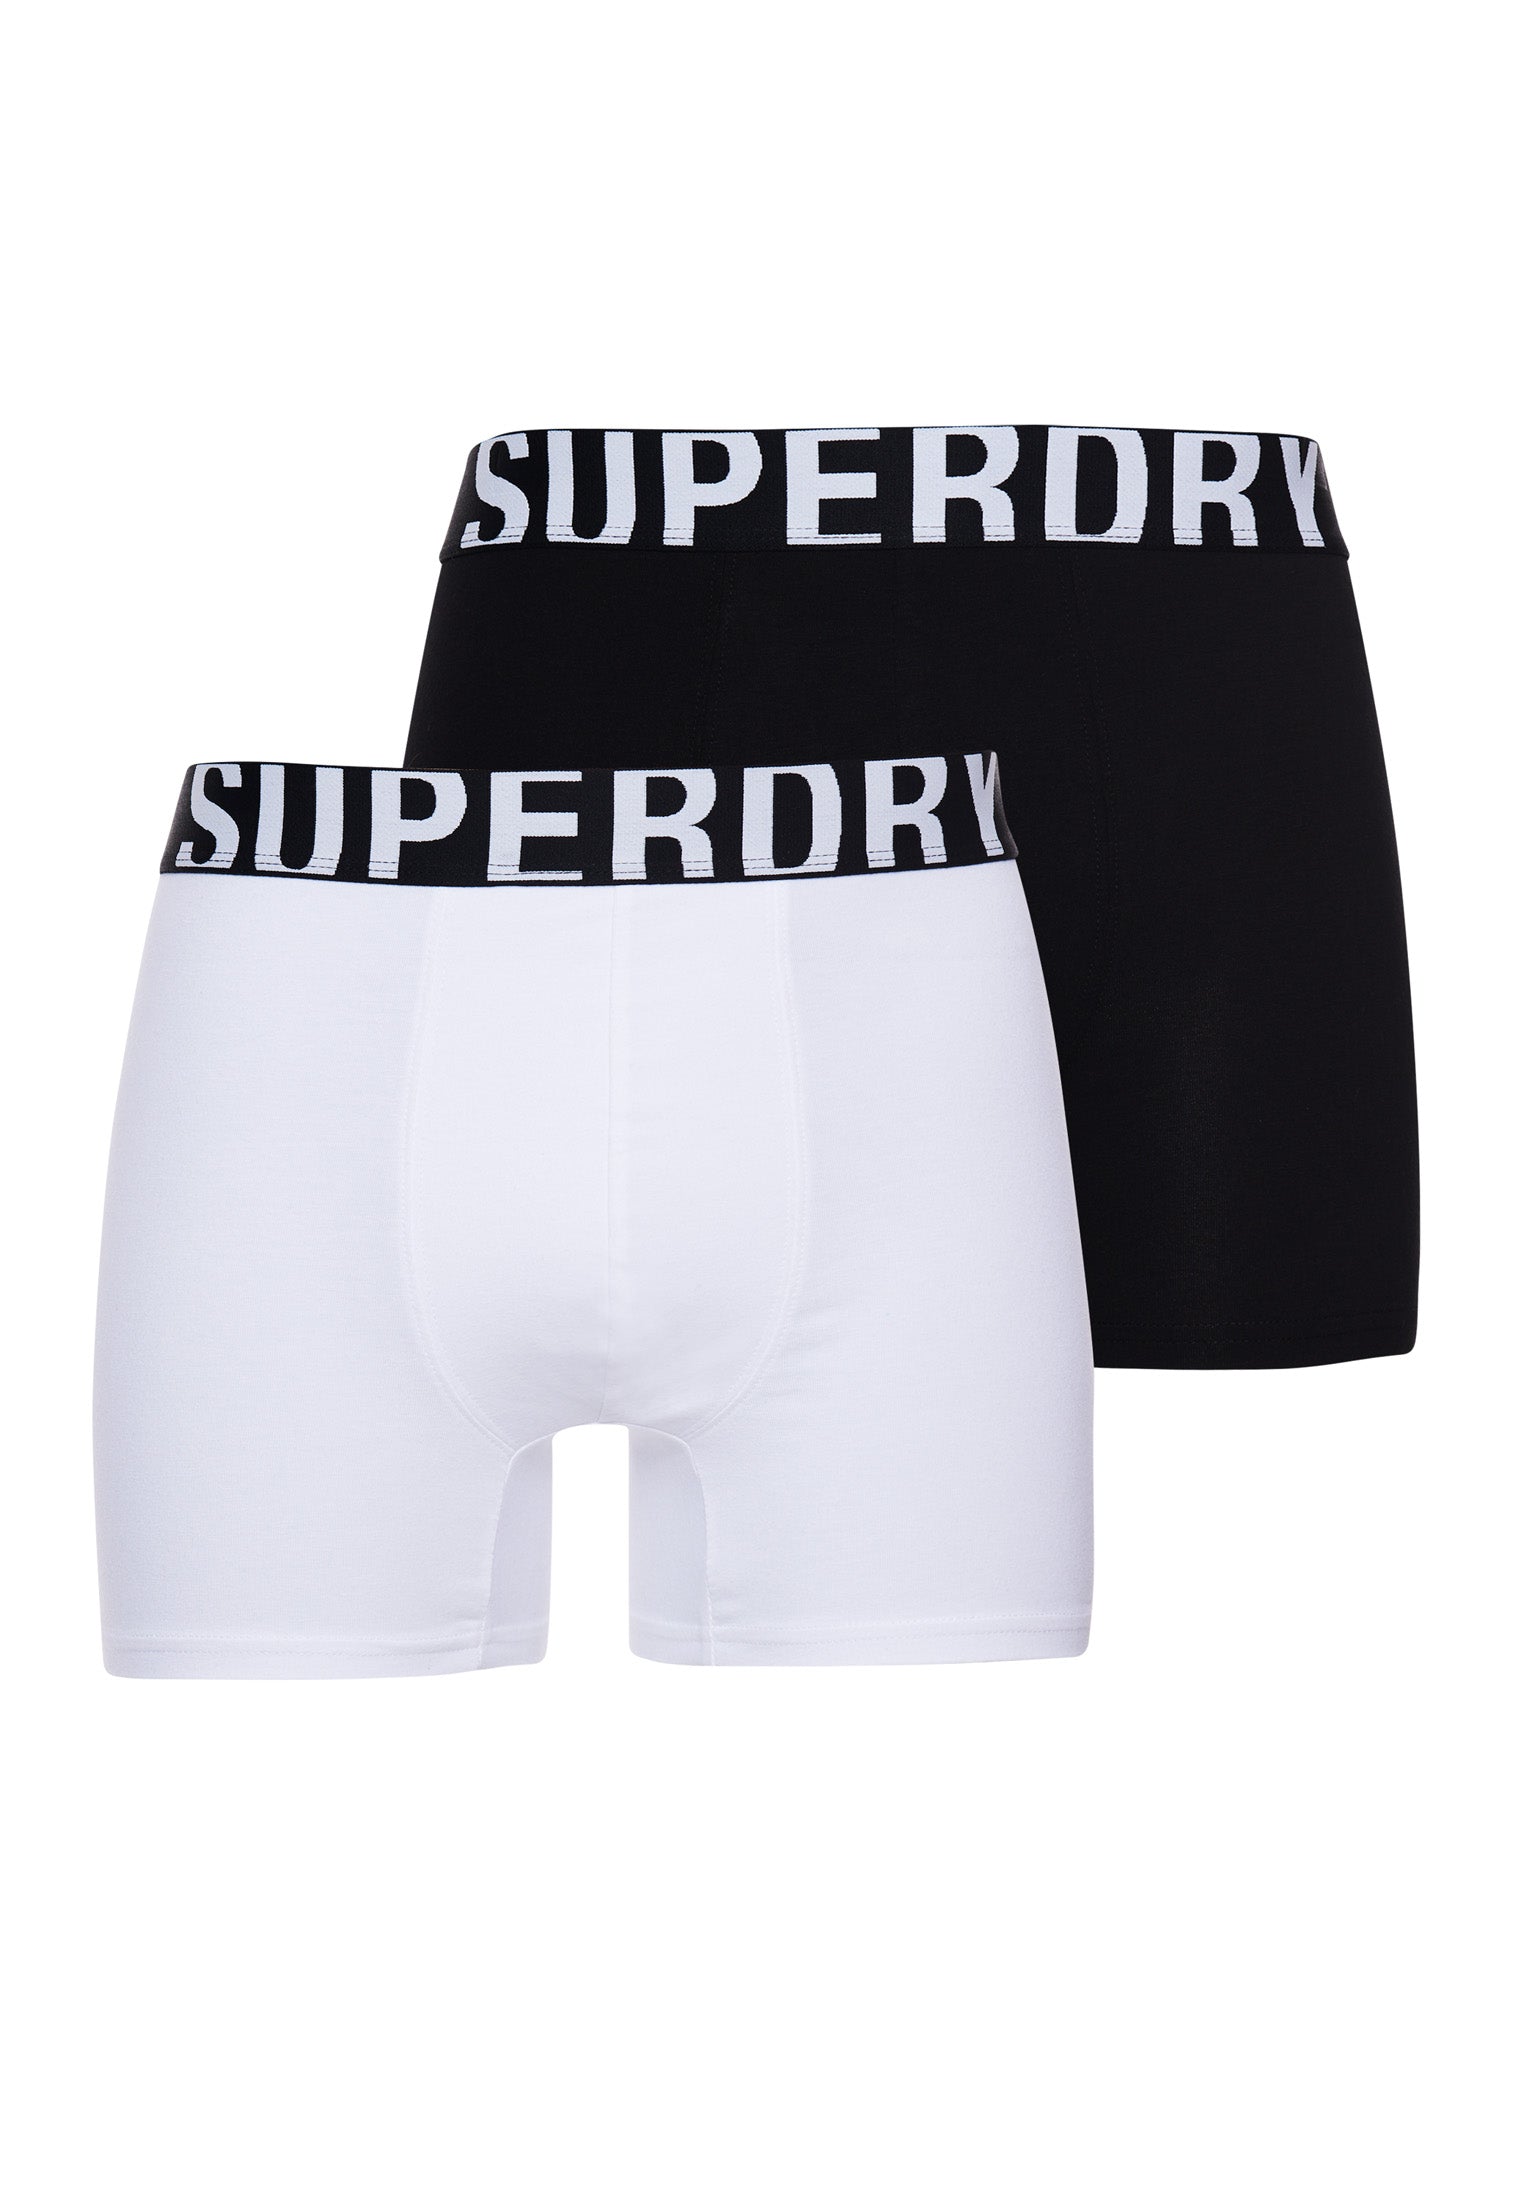 Men's Boxer dual logo double pack Black/Optic by Superdry